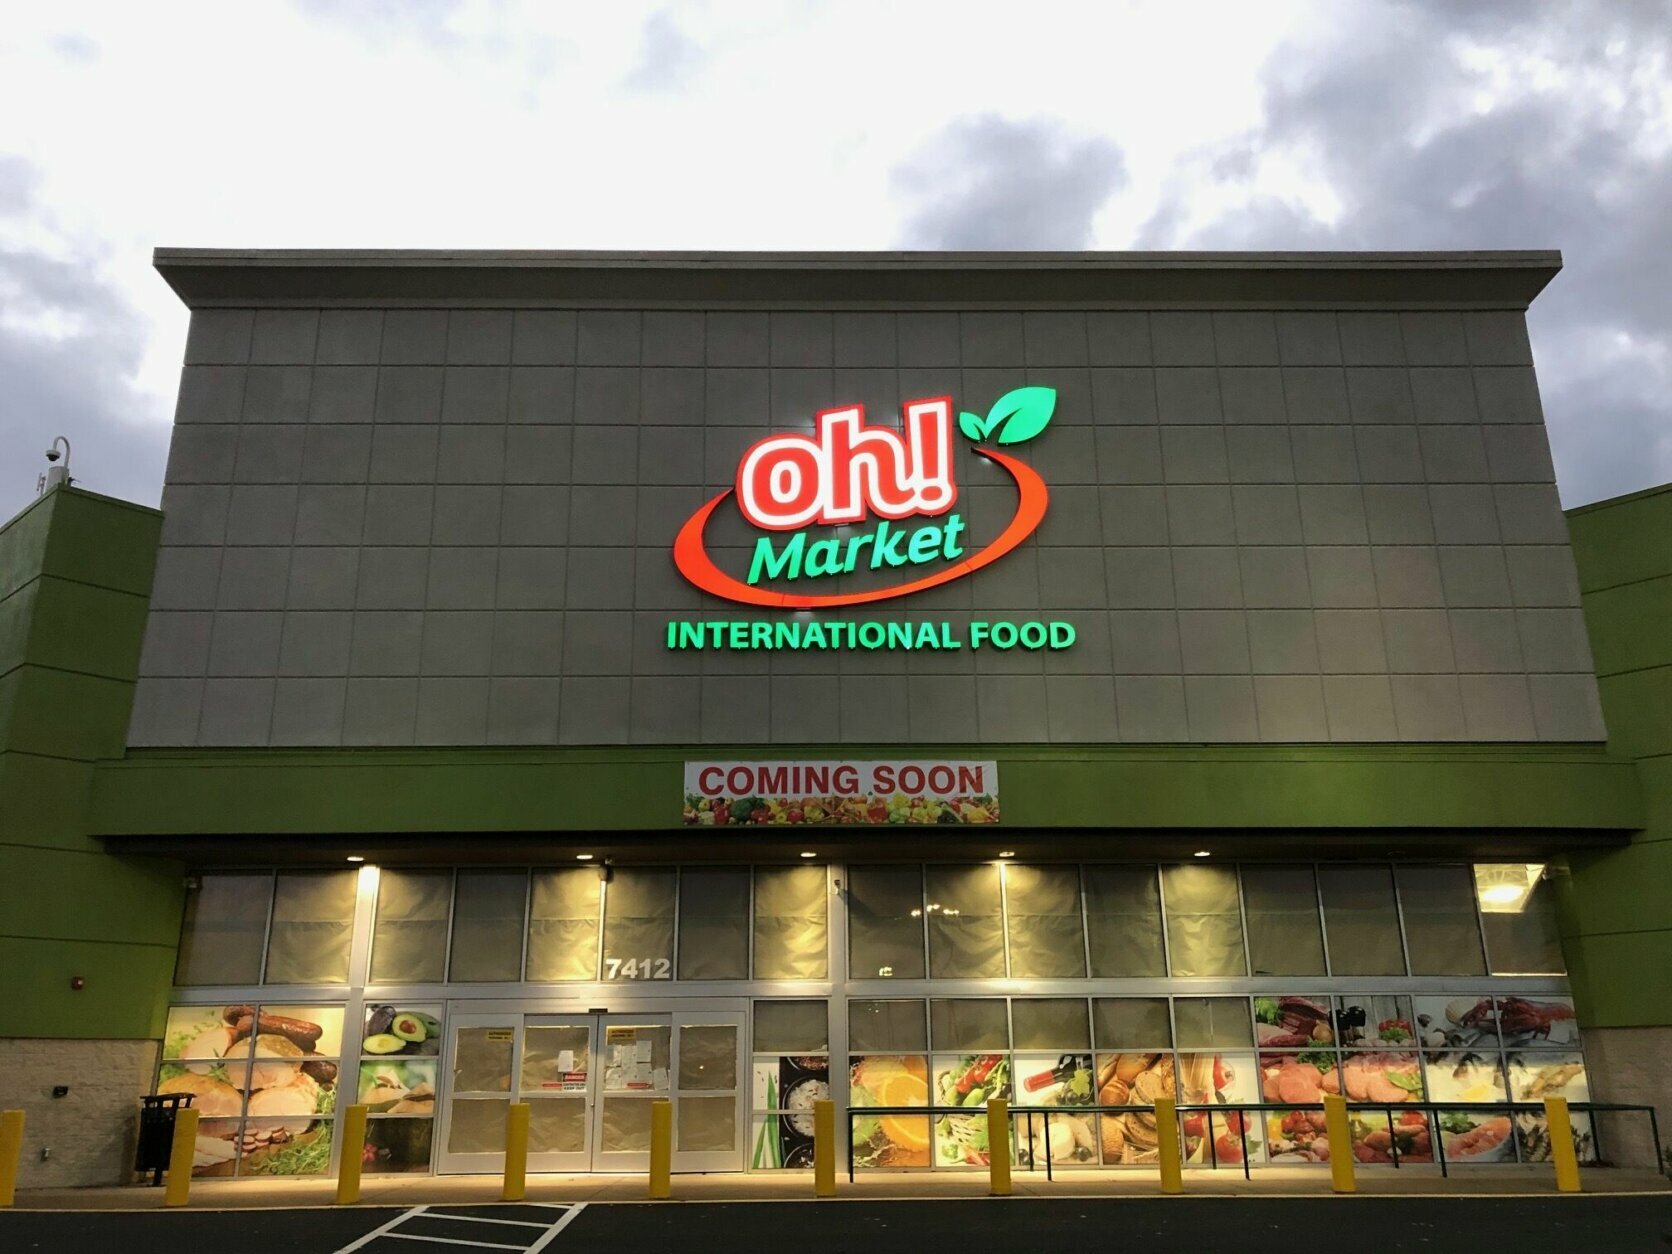 Oh! Market International Food, with products from 60 countries